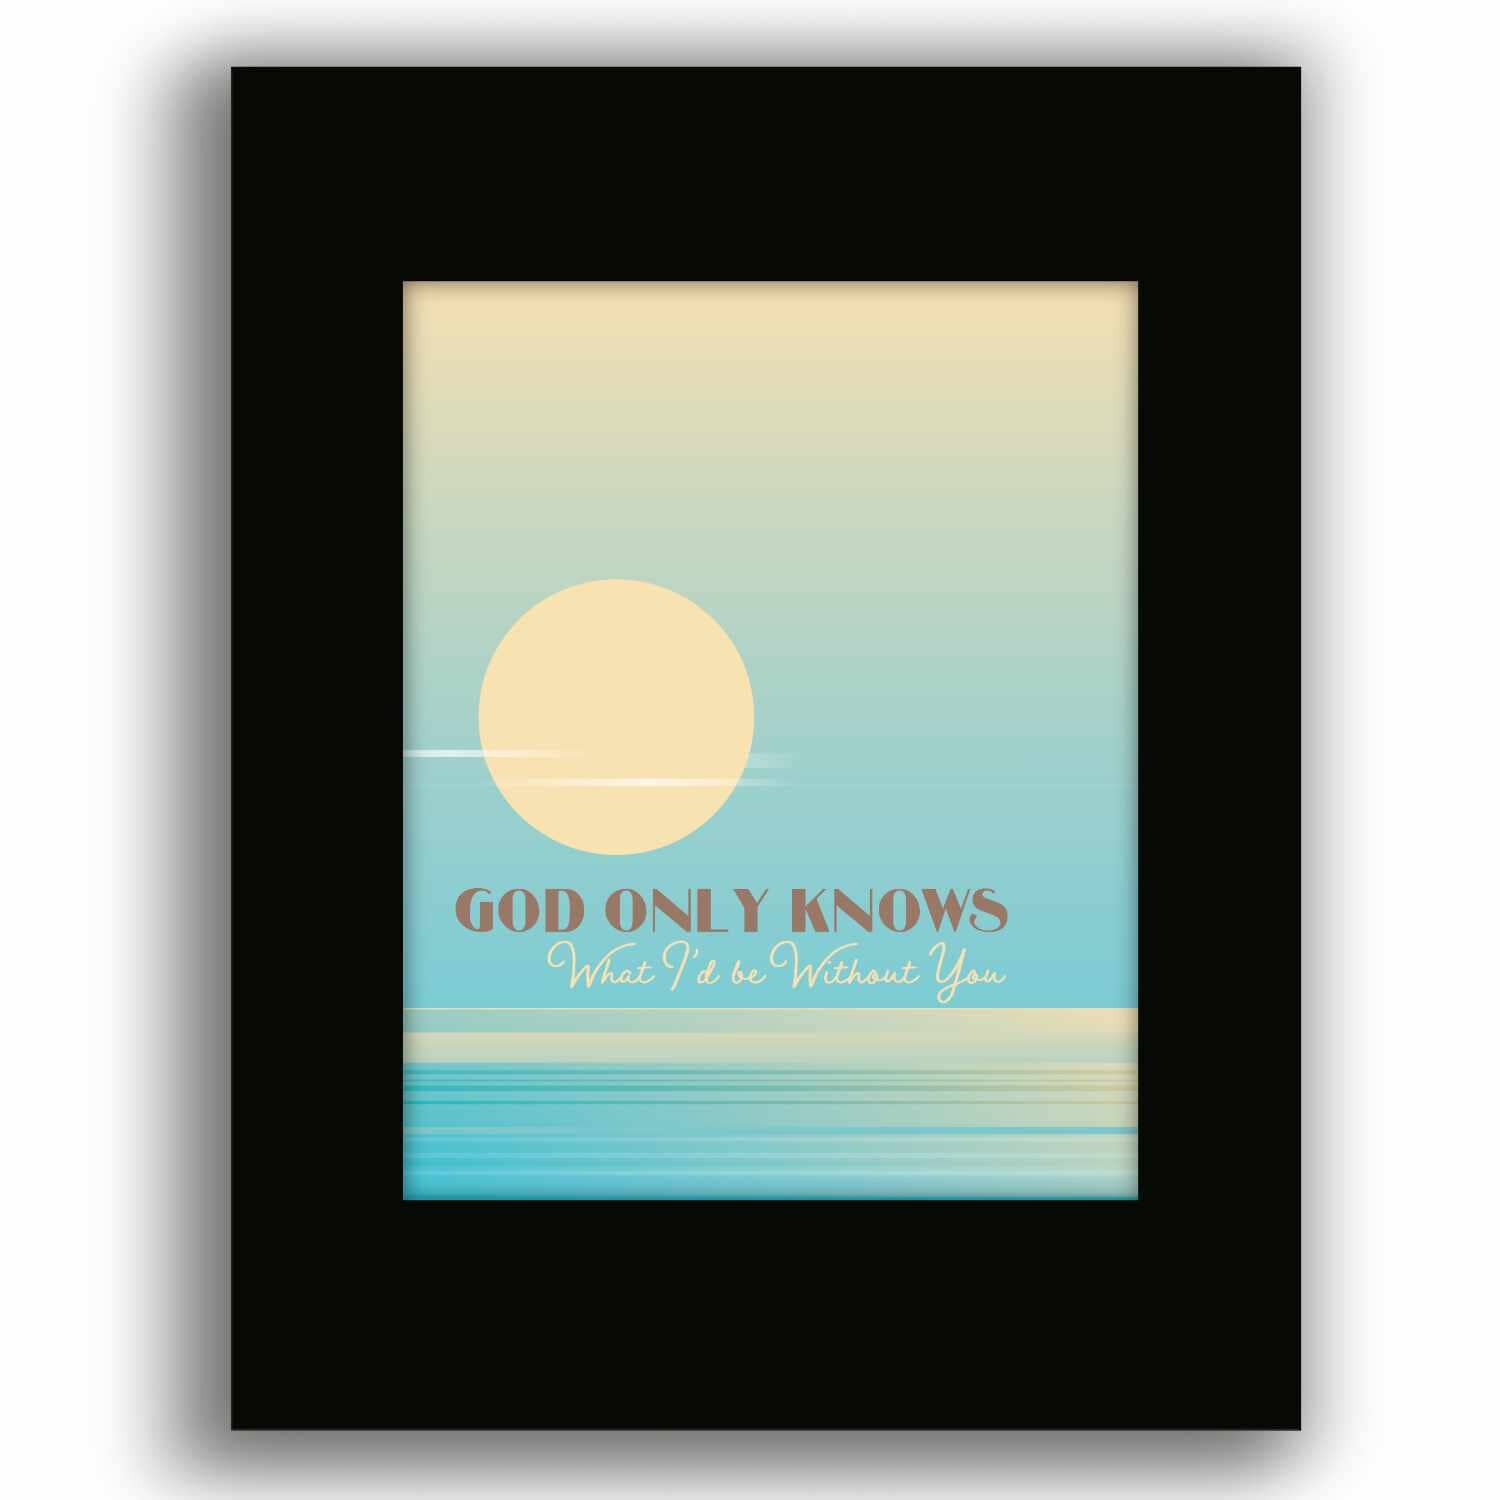 God Only Knows by the Beach Boys - Song Lyric Wall Art Song Lyrics Art Song Lyrics Art 8x10 Black Matted Print 